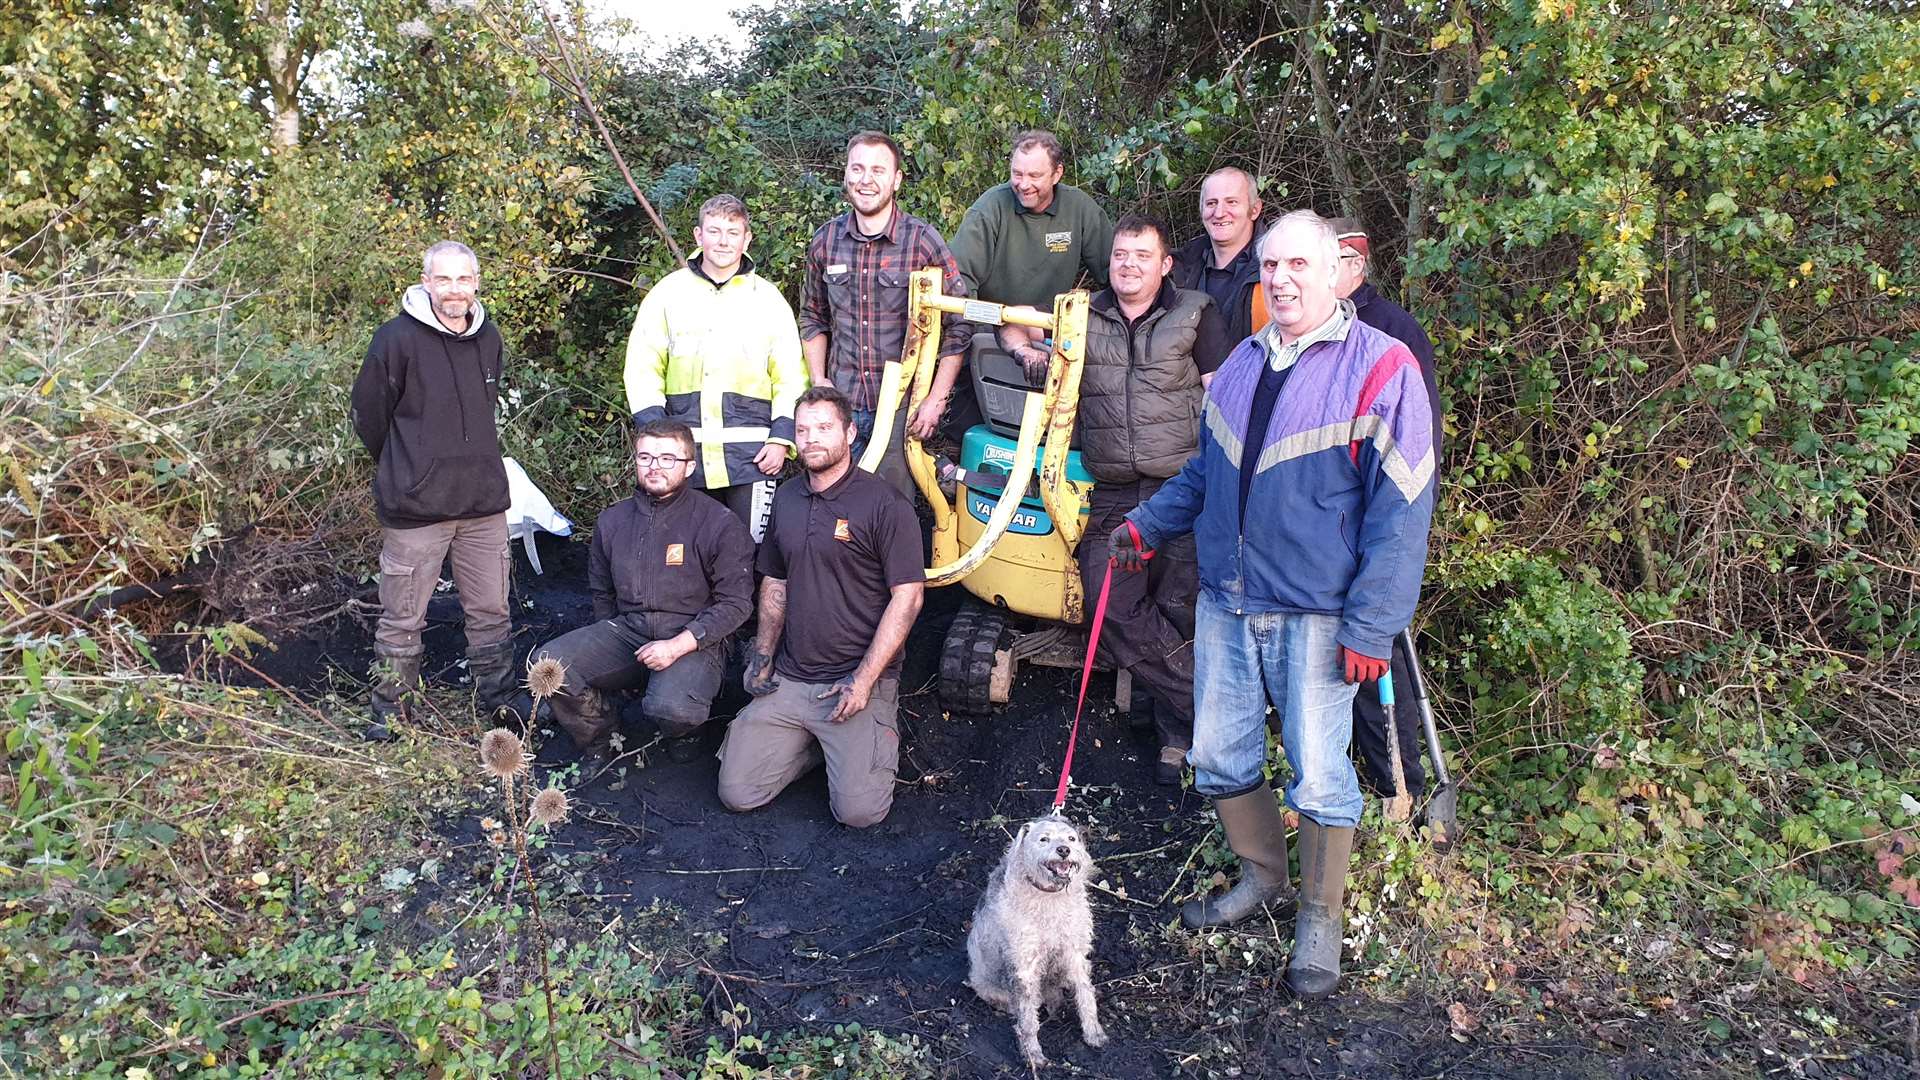 Betteshanger Park workers and volunteers who were involved in the dog rescue pose with Bella Picture: Kieron Driver